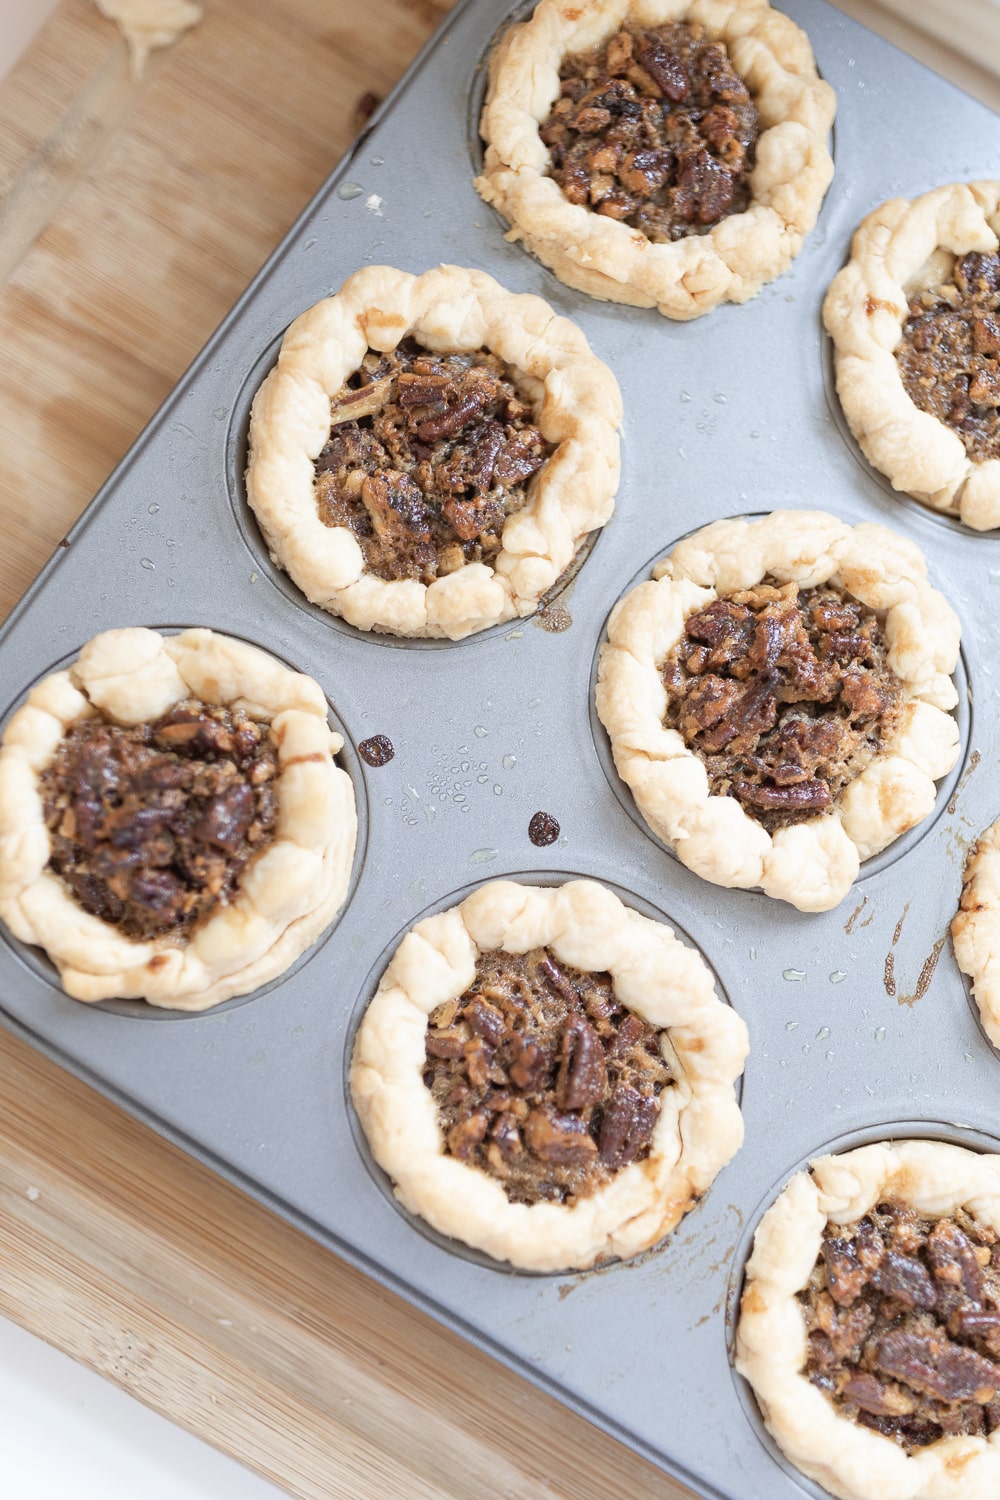 Southern pecan pie recipe with bourbon by blogger Stephanie Ziajka on Diary of a Debutante